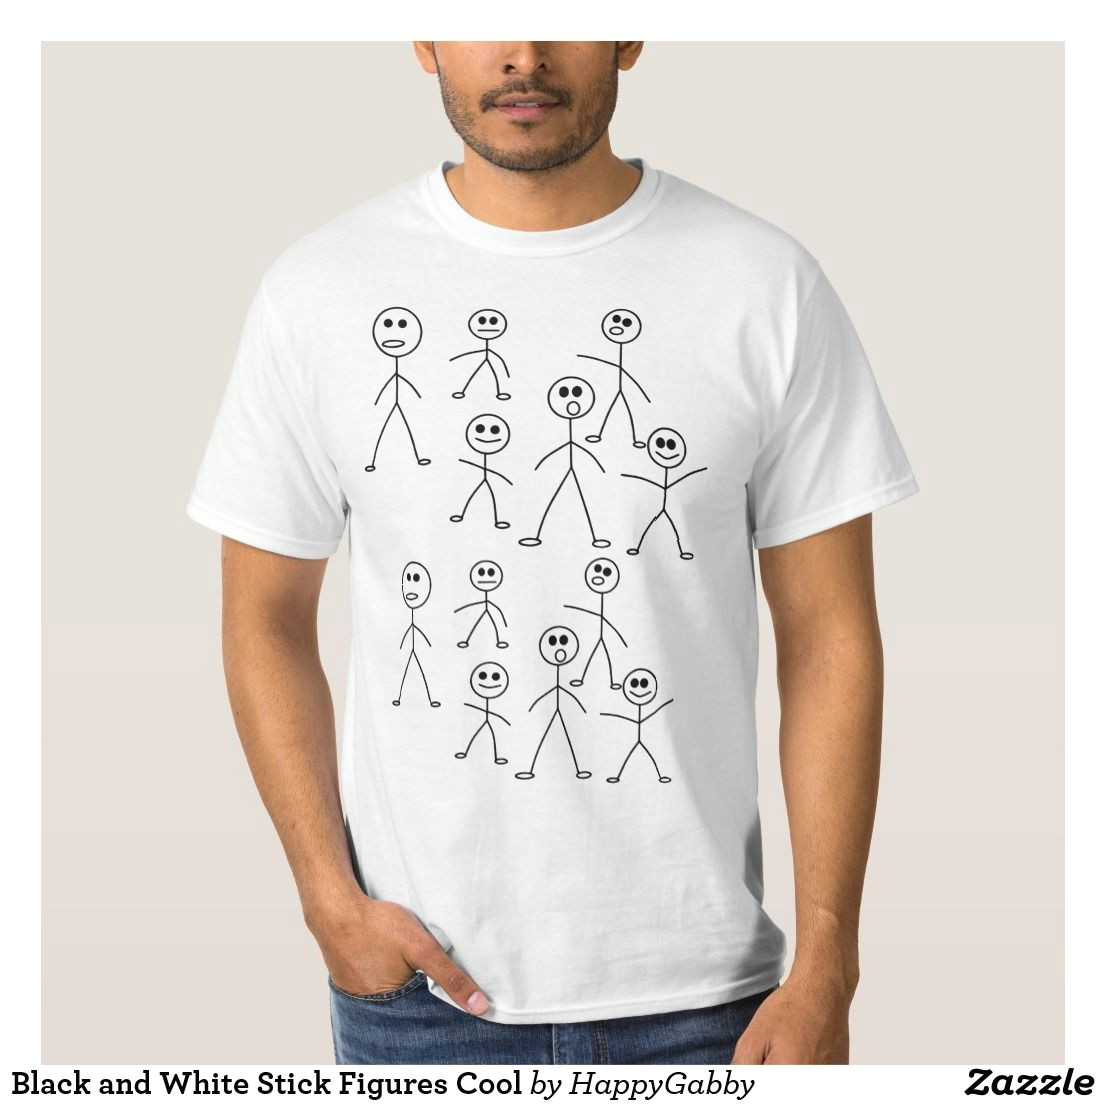 Drawing Things T Shirt Black and White Stick Figures Cool T Shirt Cute Shirts Pinterest